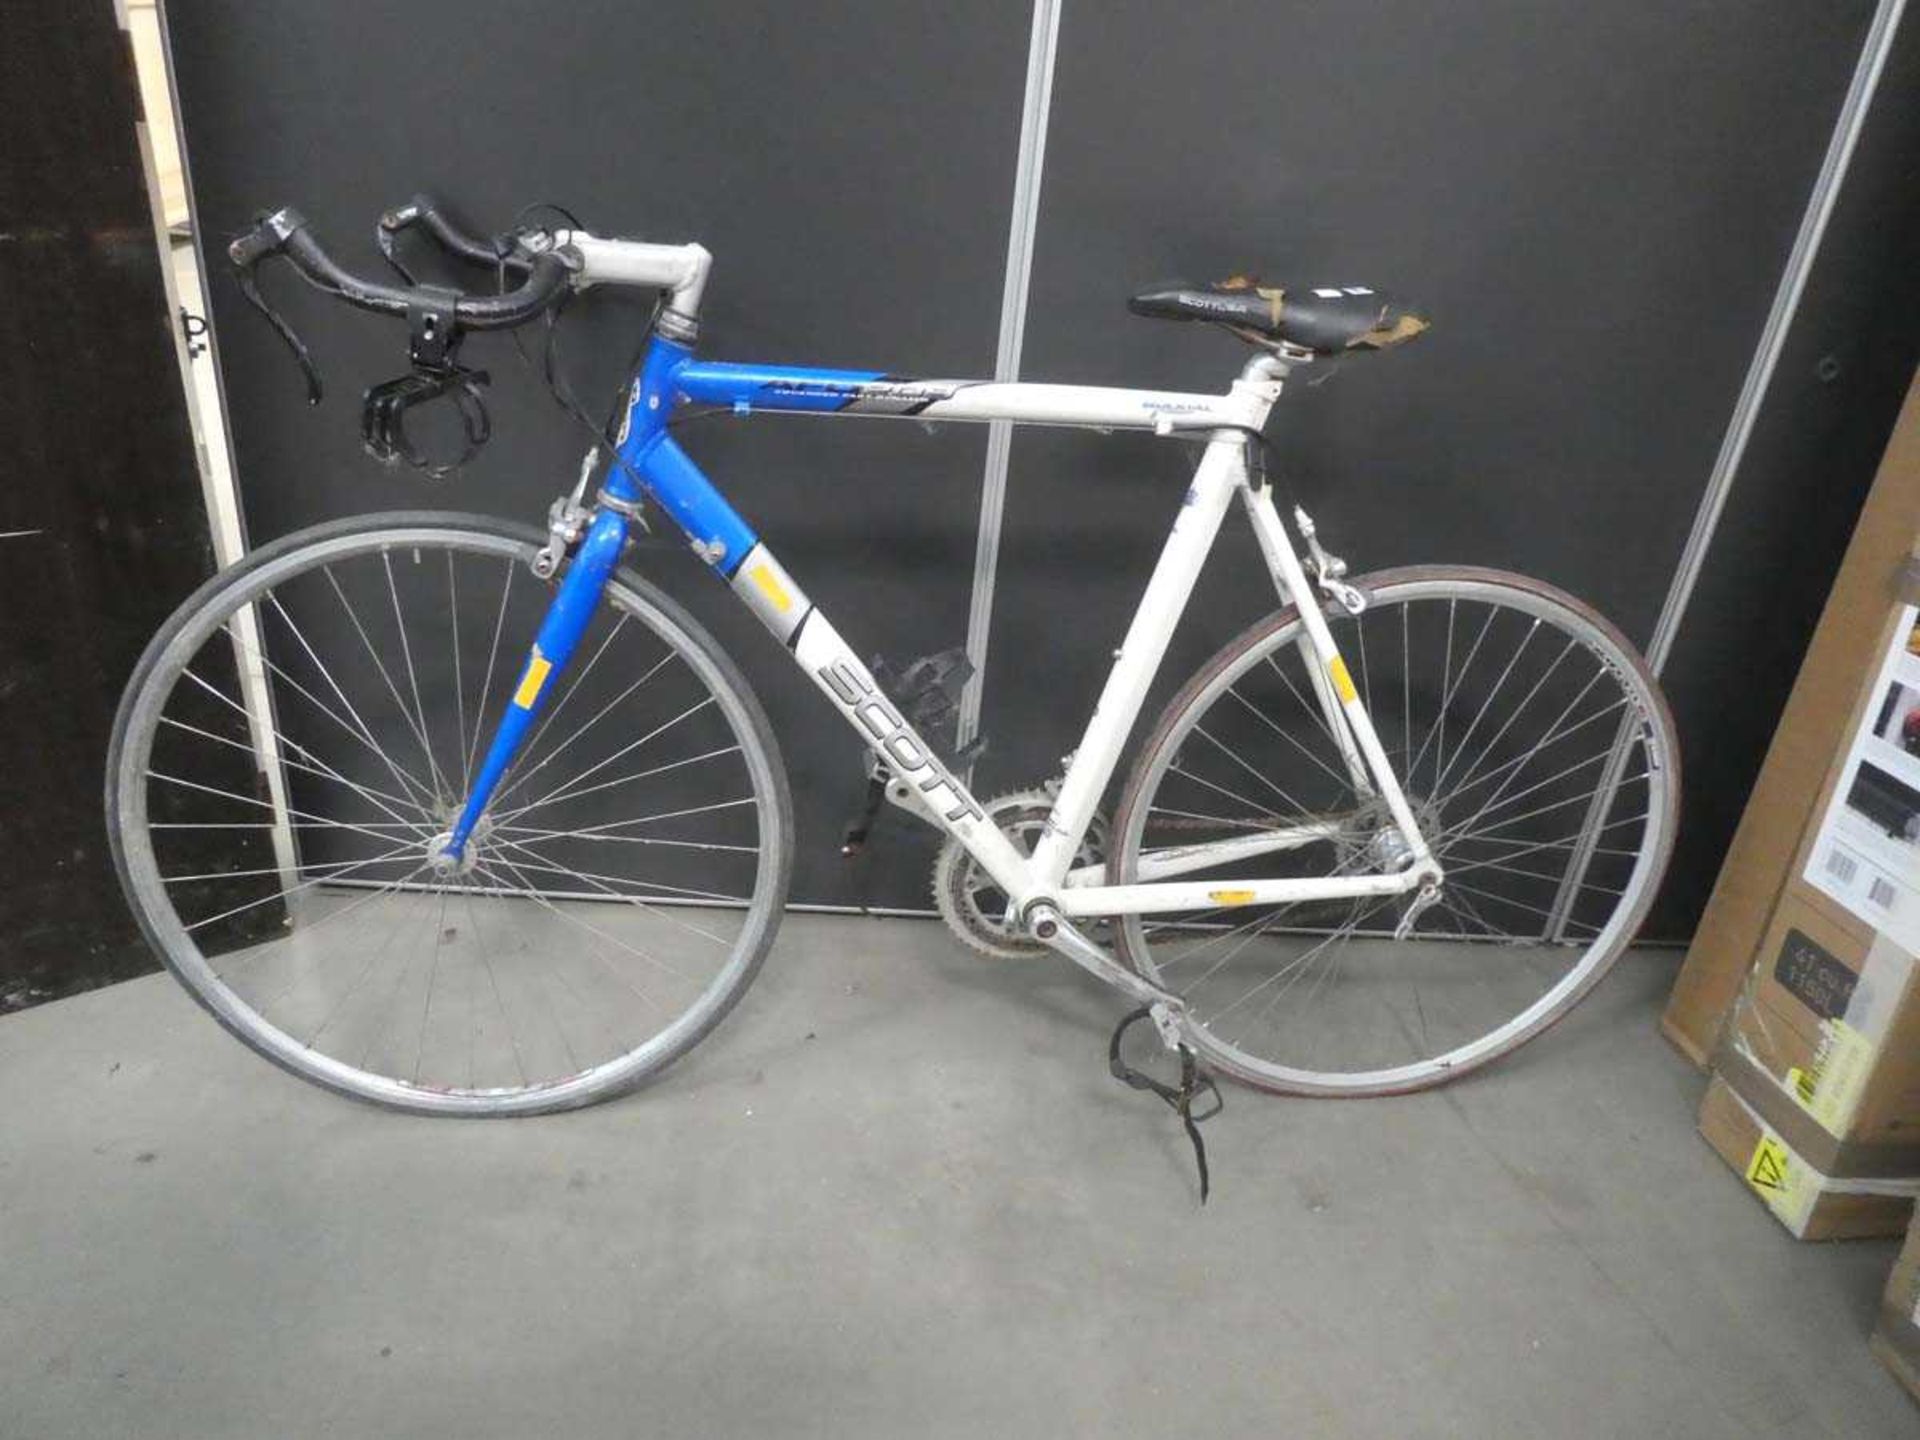 Scott racing cycle in blue and white